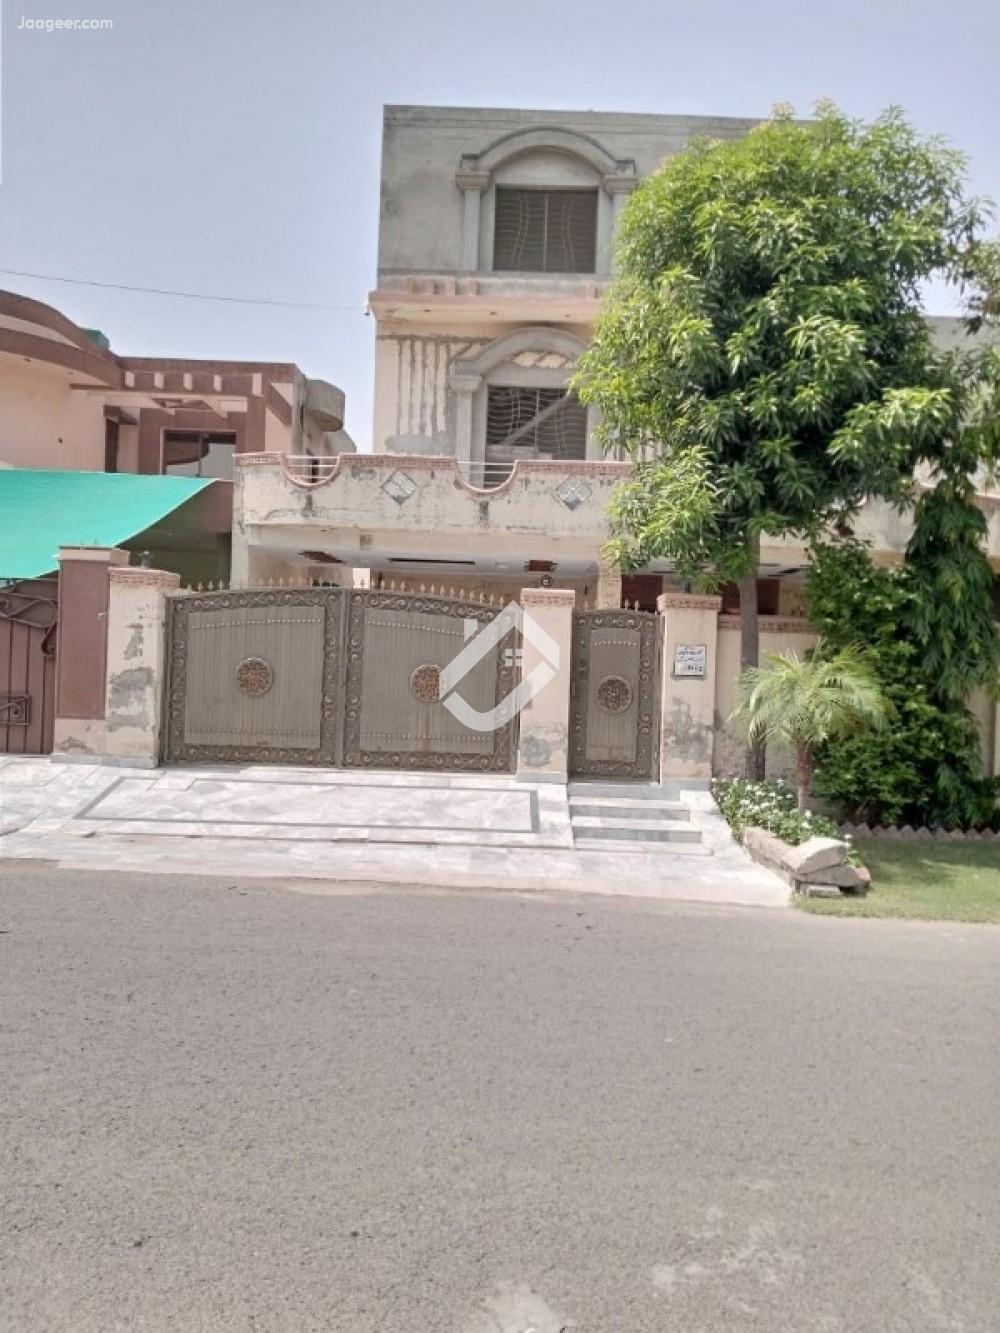 1 Kanal Commercial Double Storey House For Sale In Wapda Town H2 Block in Wapda Town, Lahore